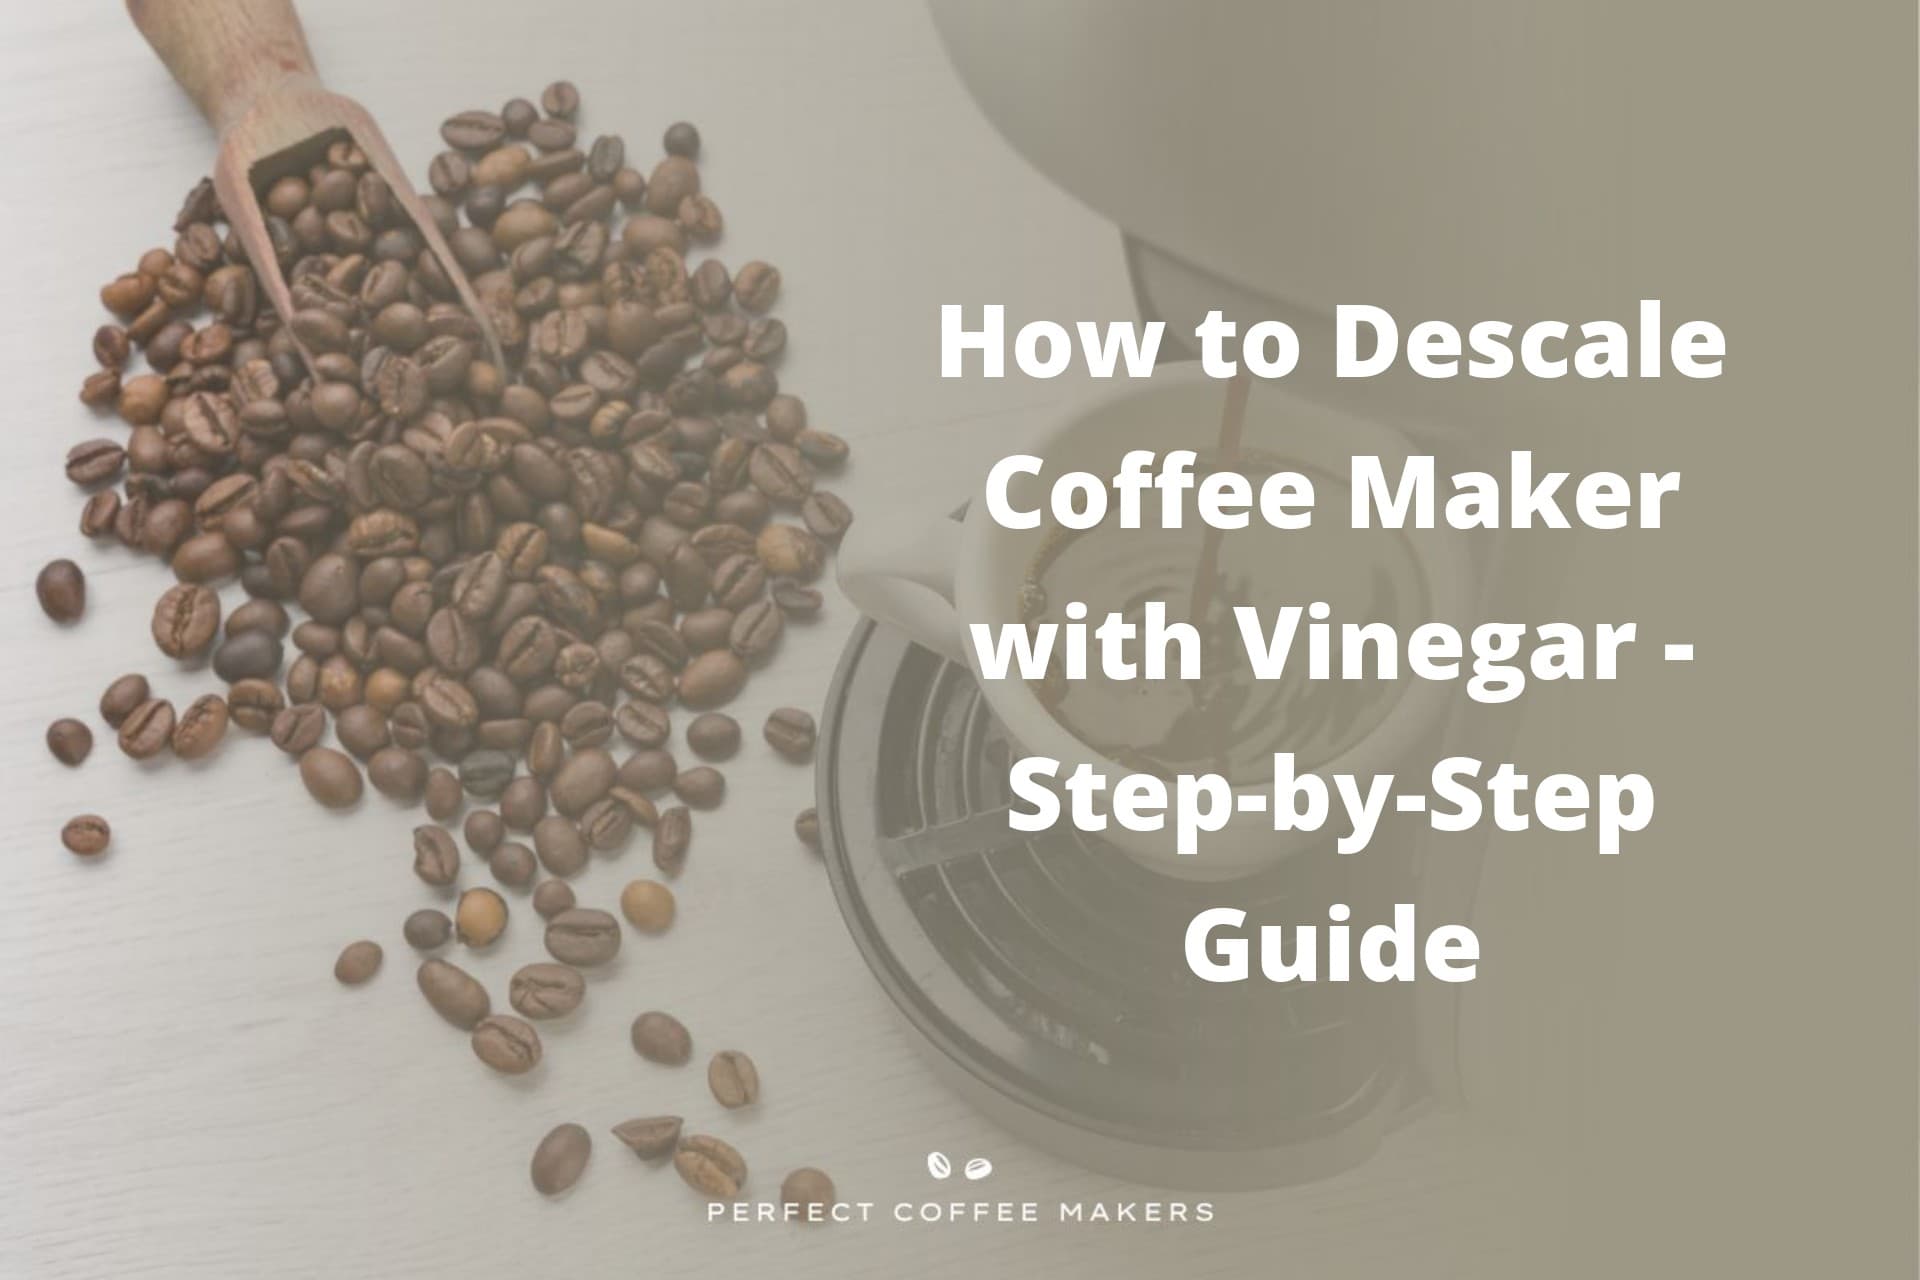 How to Descale Coffee Maker with Vinegar Step by Step Guide